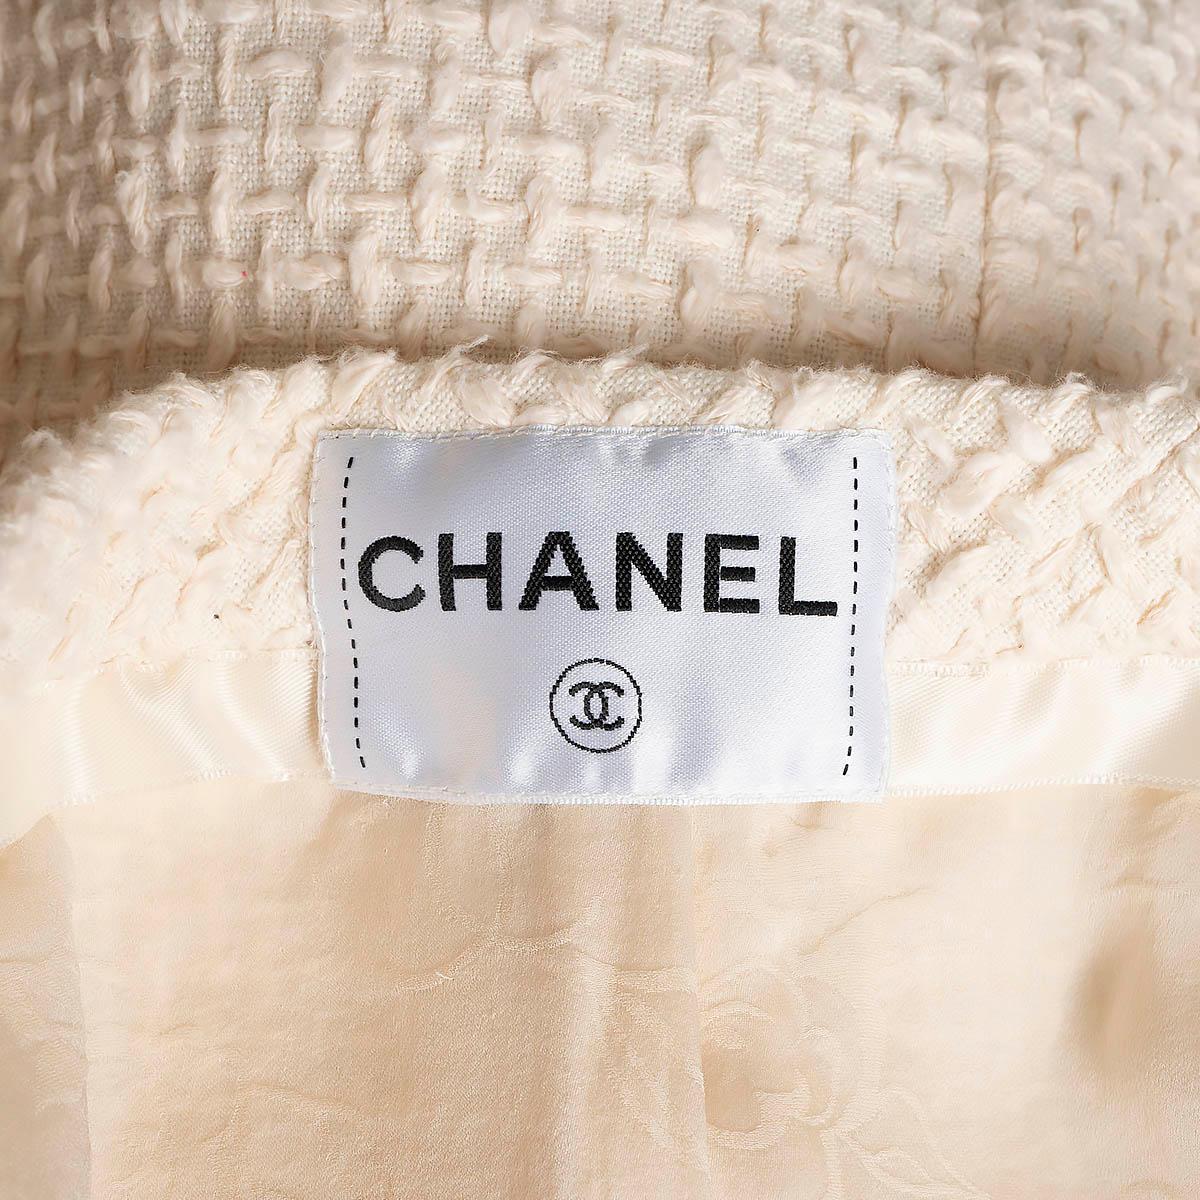 CHANEL cream cotton 2012 12P TEXTURED TWEED LEATHER LAPEL Jacket 40 M For Sale 5